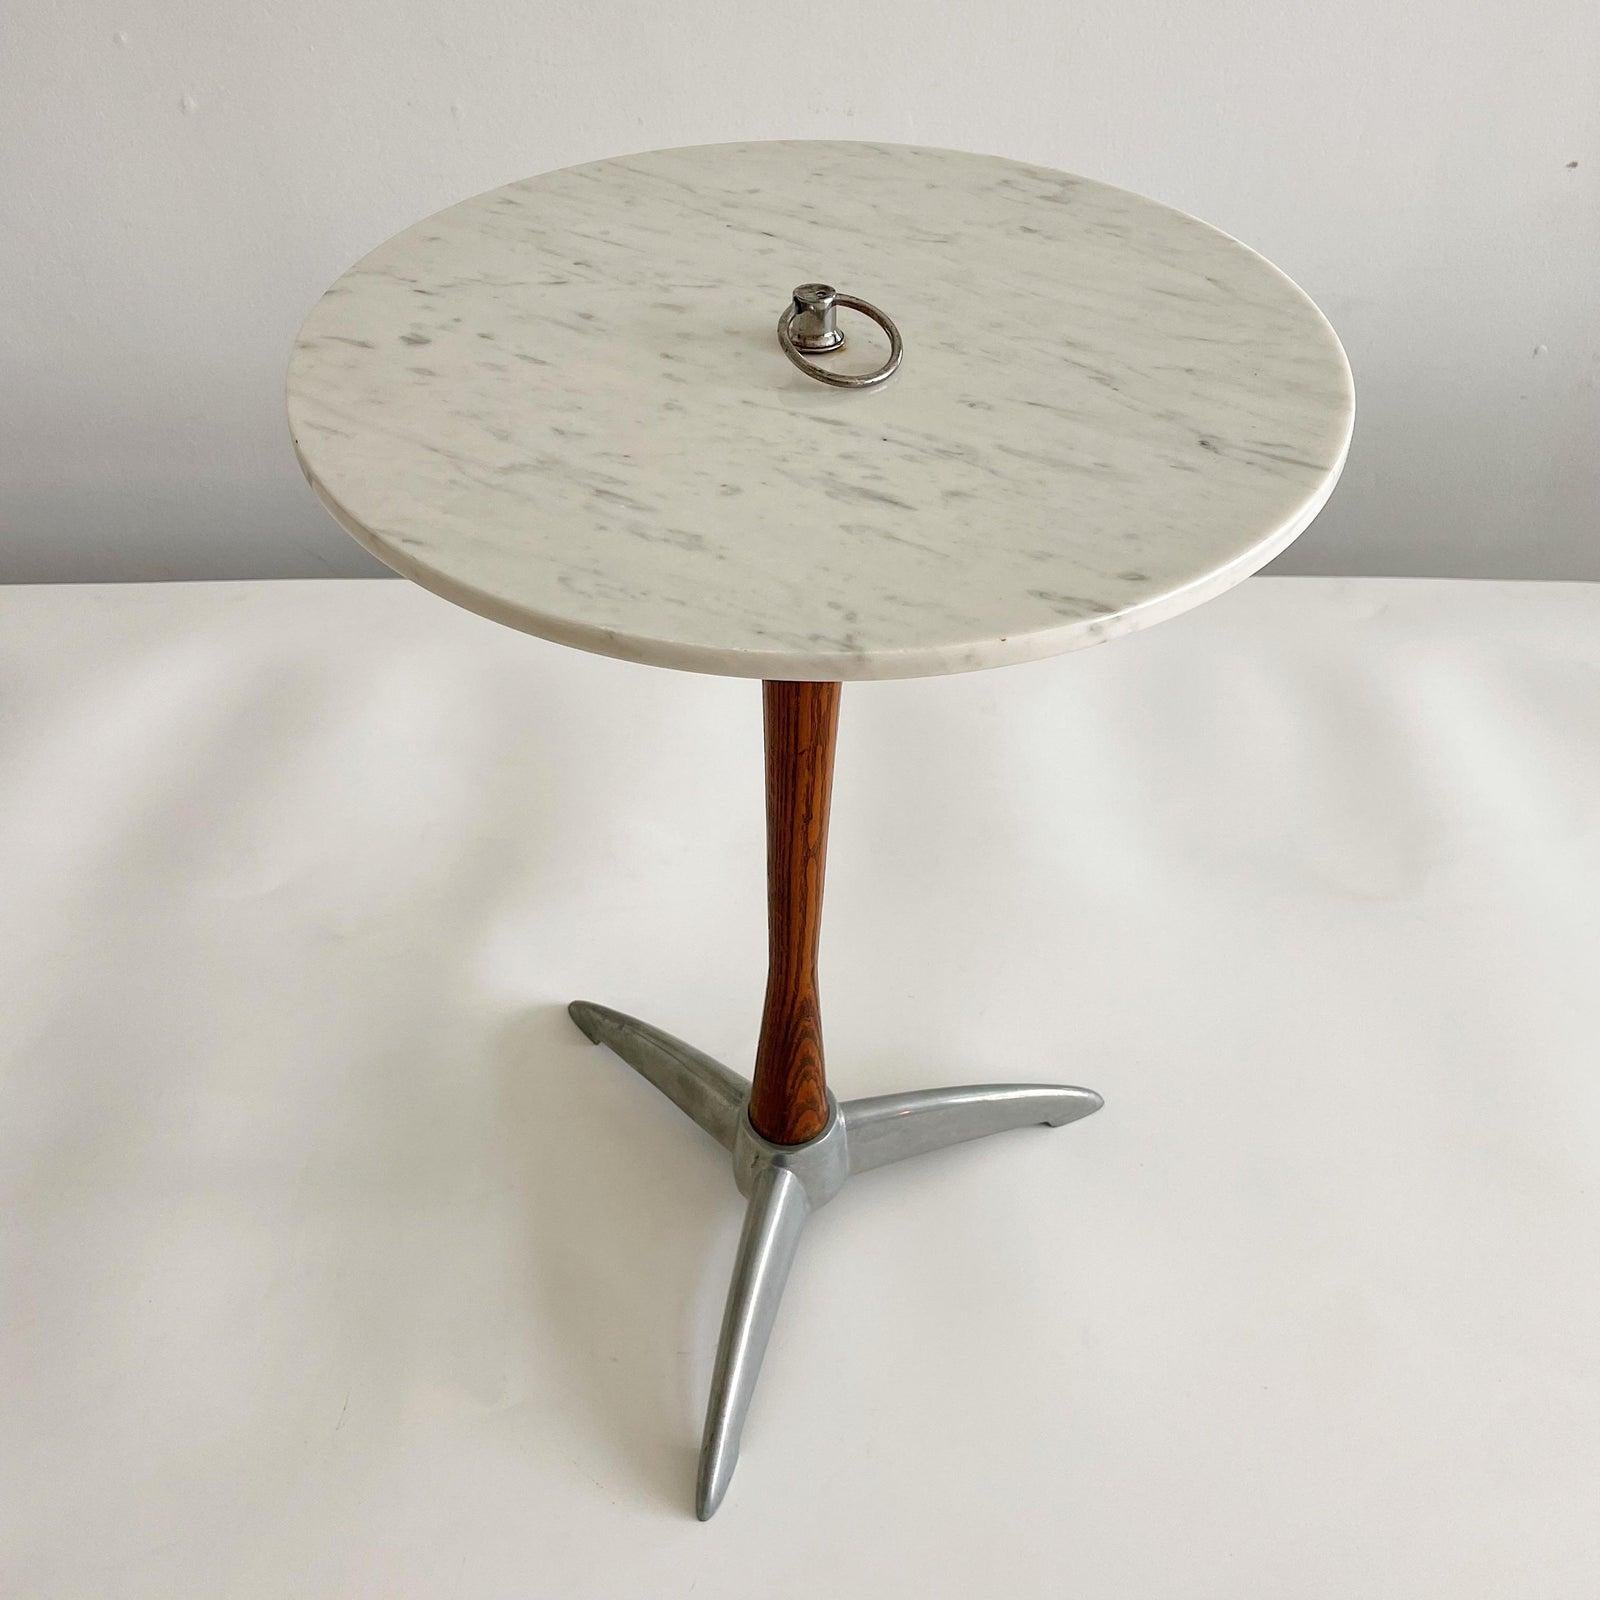 Art Deco side table, smoking table with aluminum base, oak pedestal and Carrara marble top. Completely restored to original finish.